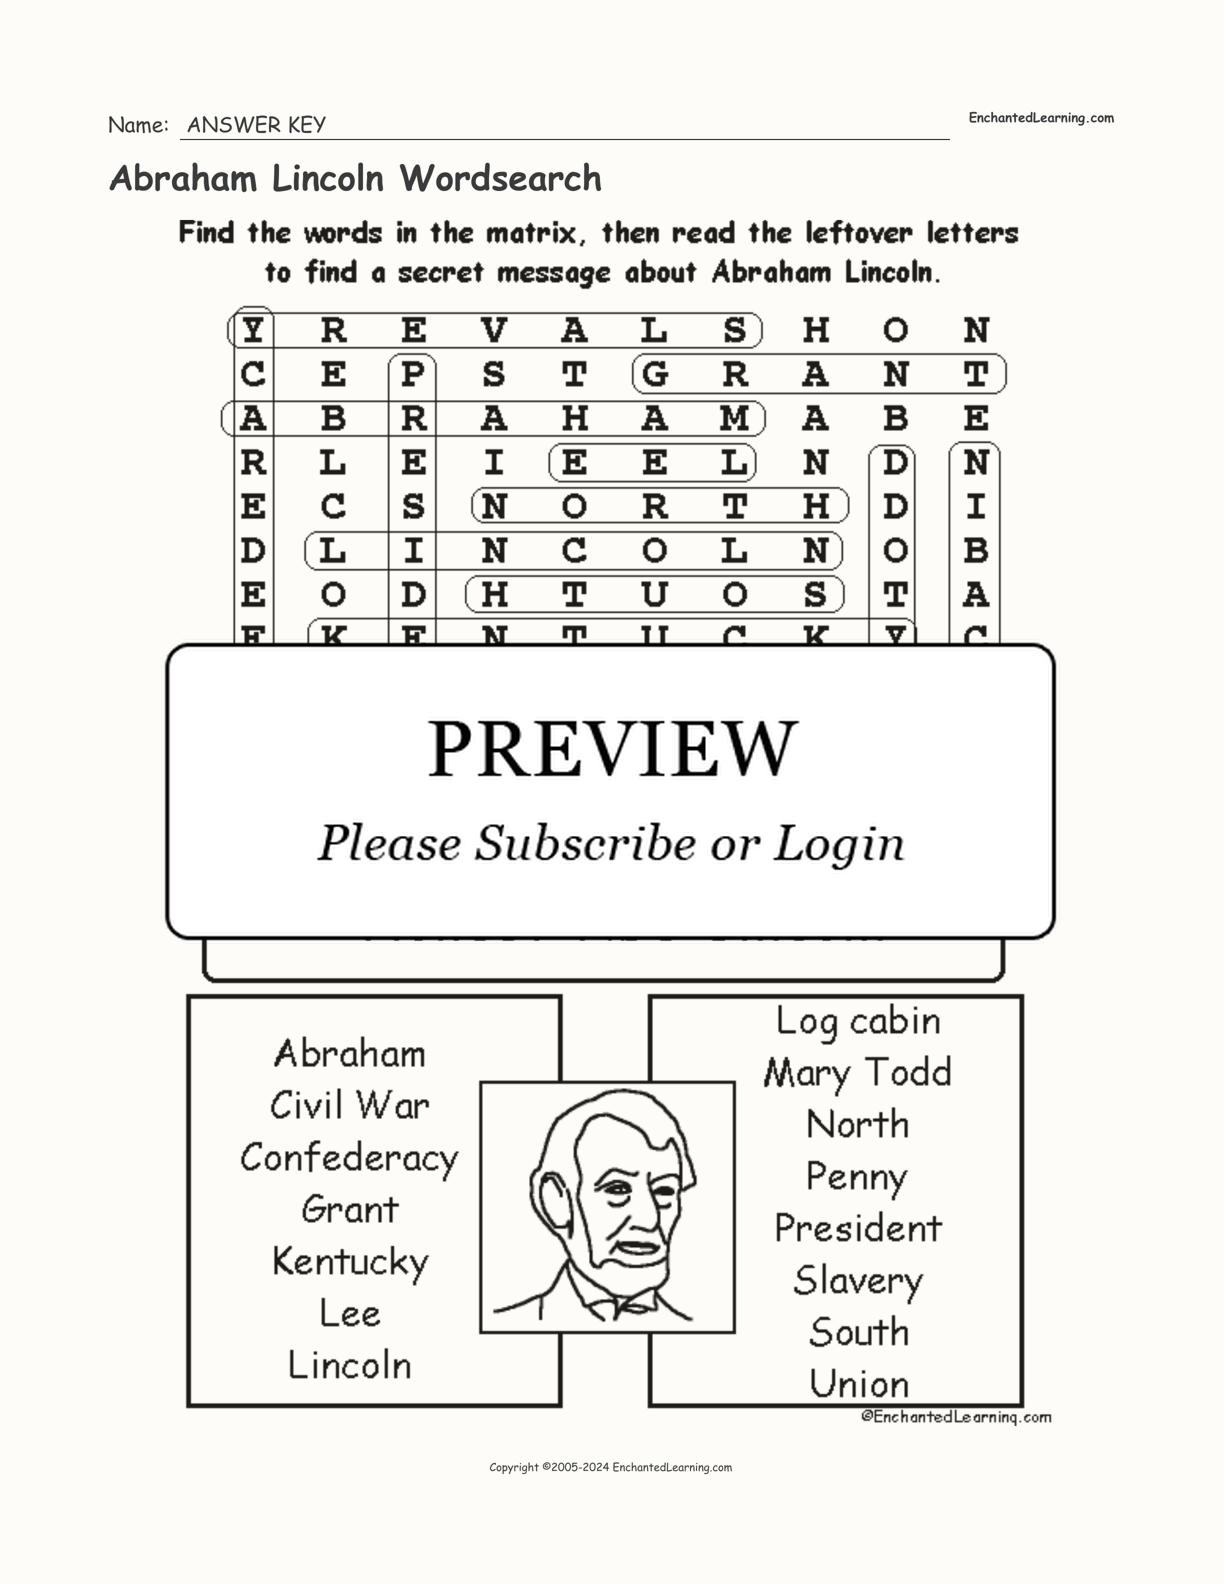 Abraham Lincoln Wordsearch interactive worksheet page 2